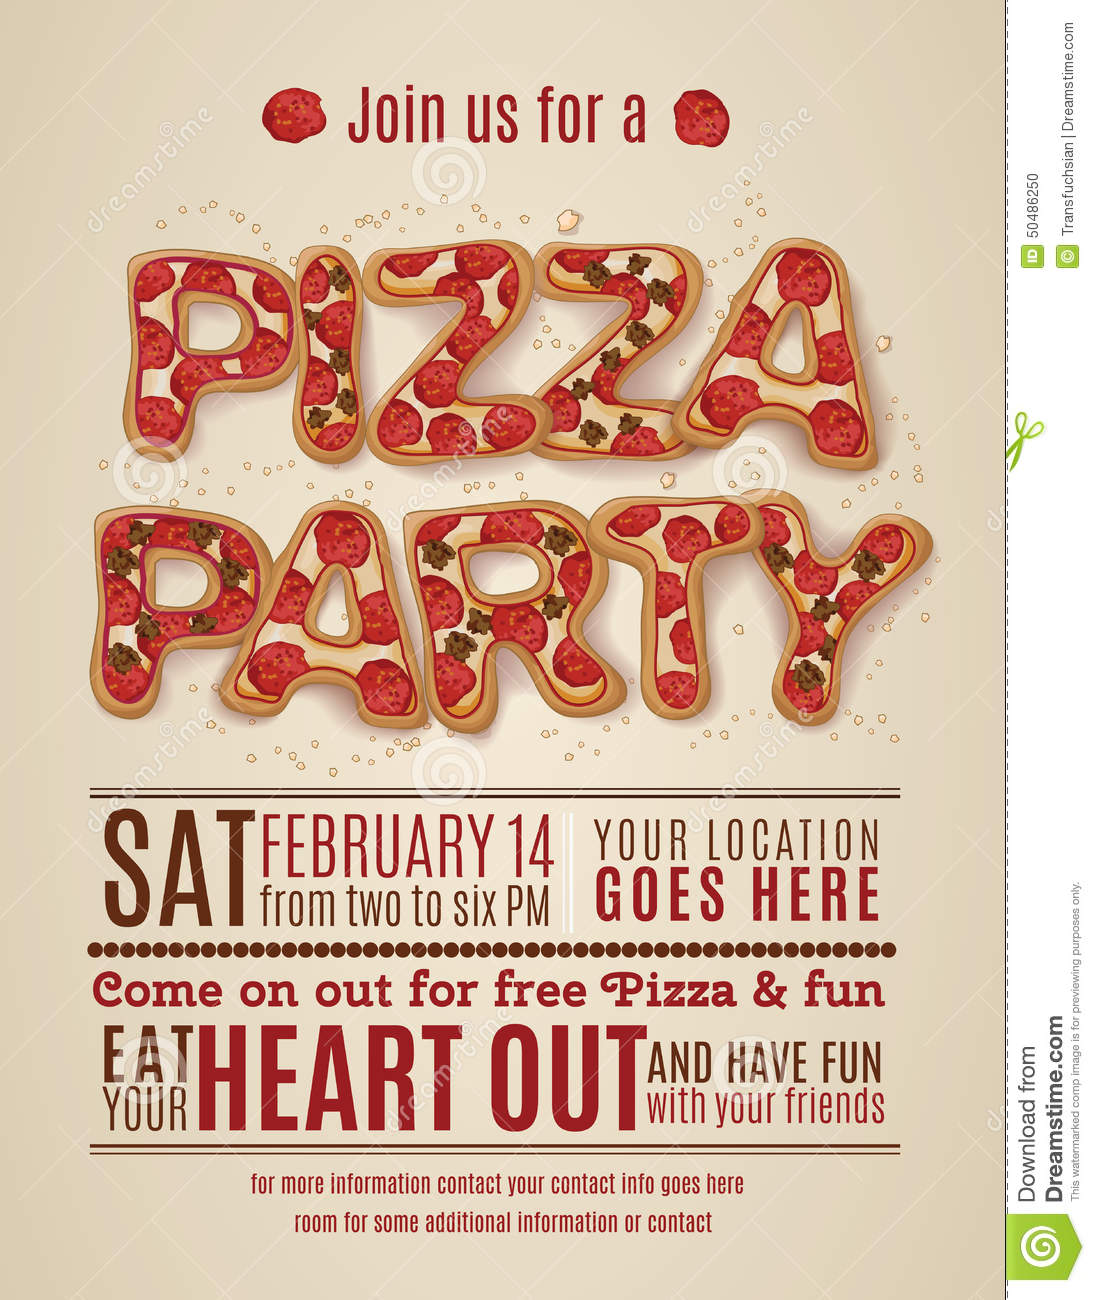 9-best-images-of-free-printable-pizza-party-flyers-free-printable